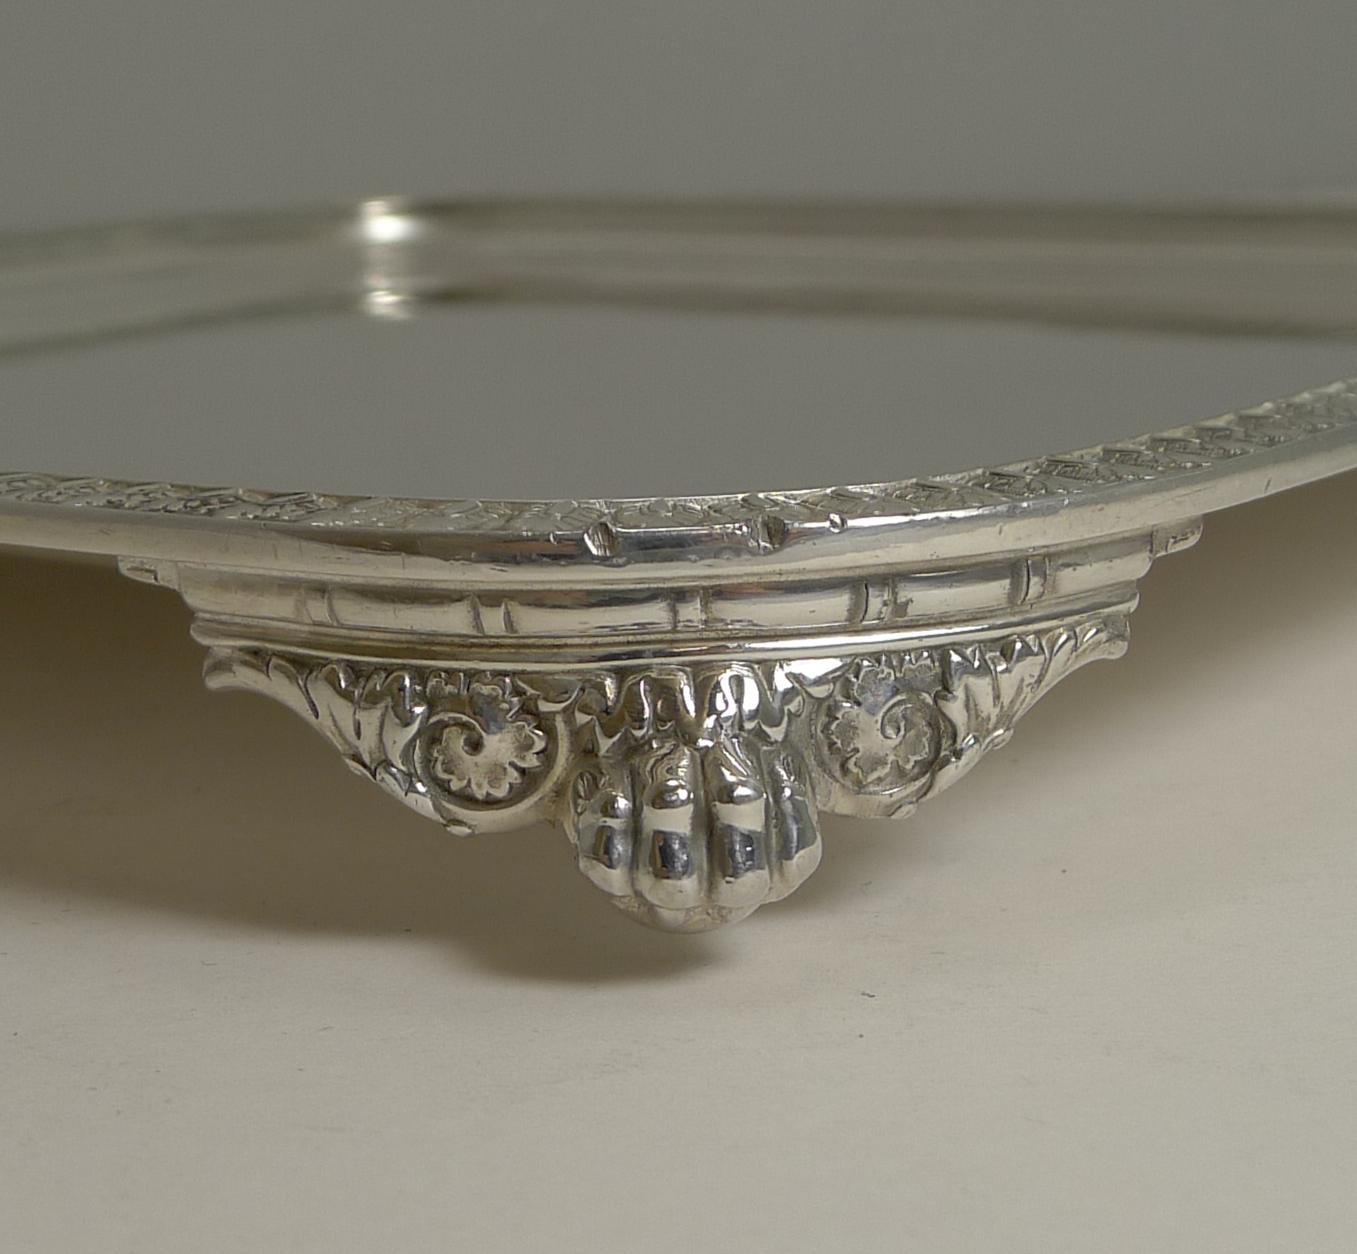 A very smart vintage silver plated square serving tray with a simple decorative raised border.

The tray stands on four decorative ball and claw feet.

Mid-20th century and in excellent condition. The underside is fully marked Tiffany & Co. /